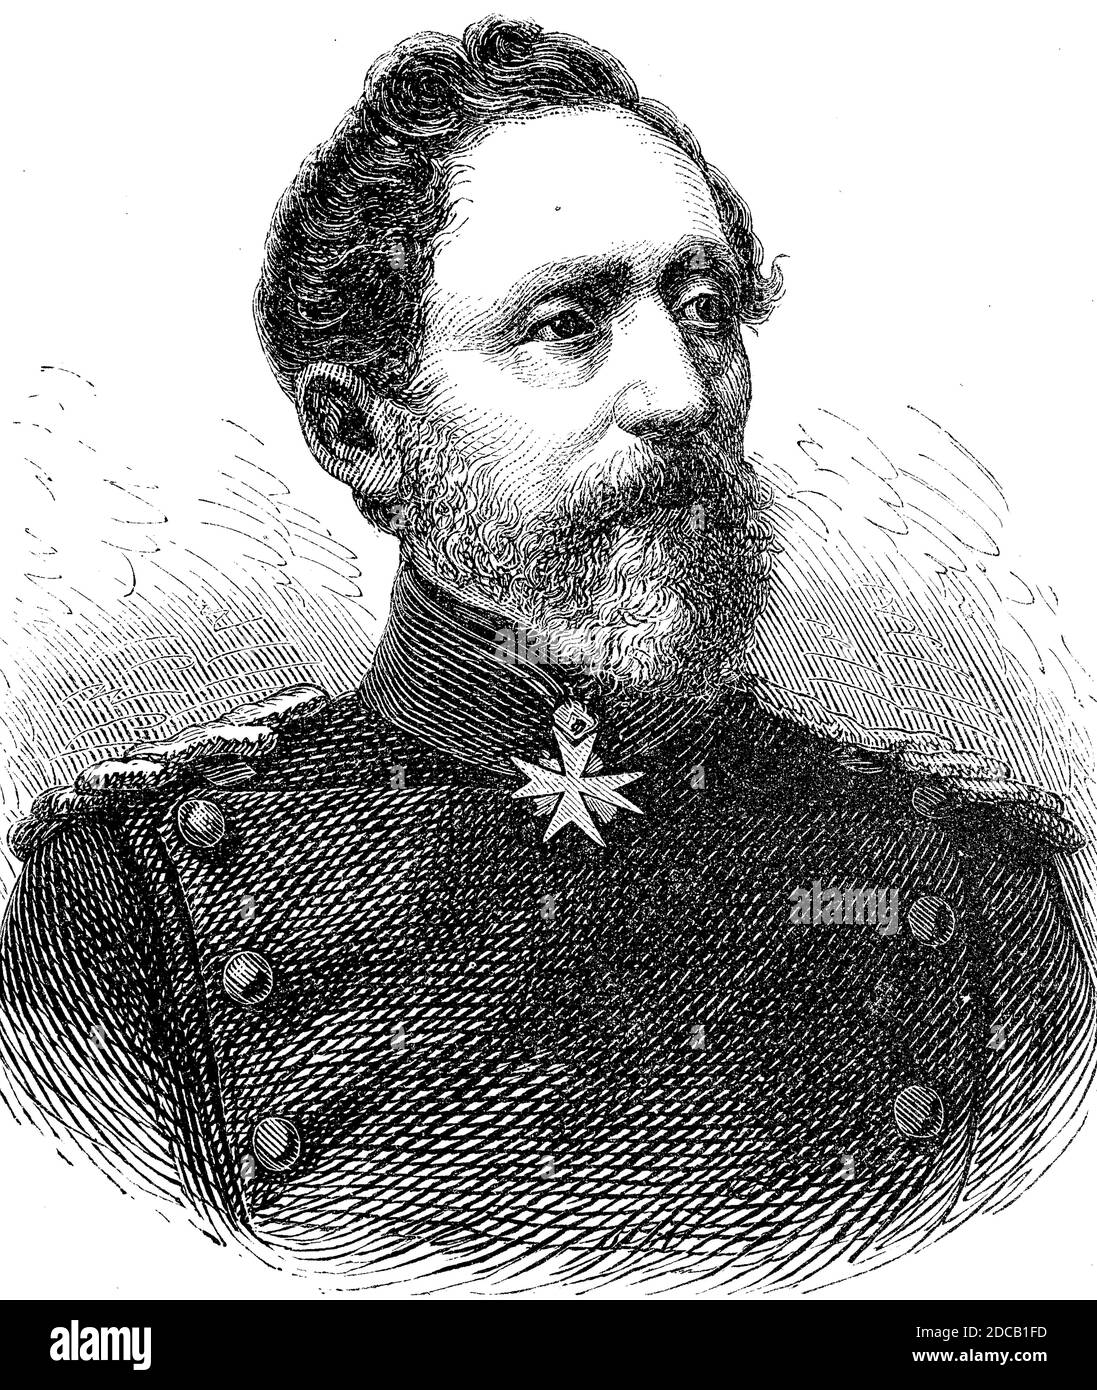 Karl Konstantin Albrecht Leonhard Graf von Blumenthal, 30 July 1810 - 21 December 1900, a Prussian Field Marshal, chiefly remembered for his decisive intervention at the Battle of Königgrätz in 1866, his victories at Wörth and Weißenburg, and above all his refusal to bombard Paris in 1870 during the siege  /  Karl Konstantin Albrecht Leonhard von Blumenthal, ab 1883 Graf von Blumenthal, 30. Juli 1810 - 21. Dezember 1900, war ein preußischer Generalfeldmarschal, Historisch, historical, digital improved reproduction of an original from the 19th century / digitale Reproduktion einer Originalvorla Stock Photo